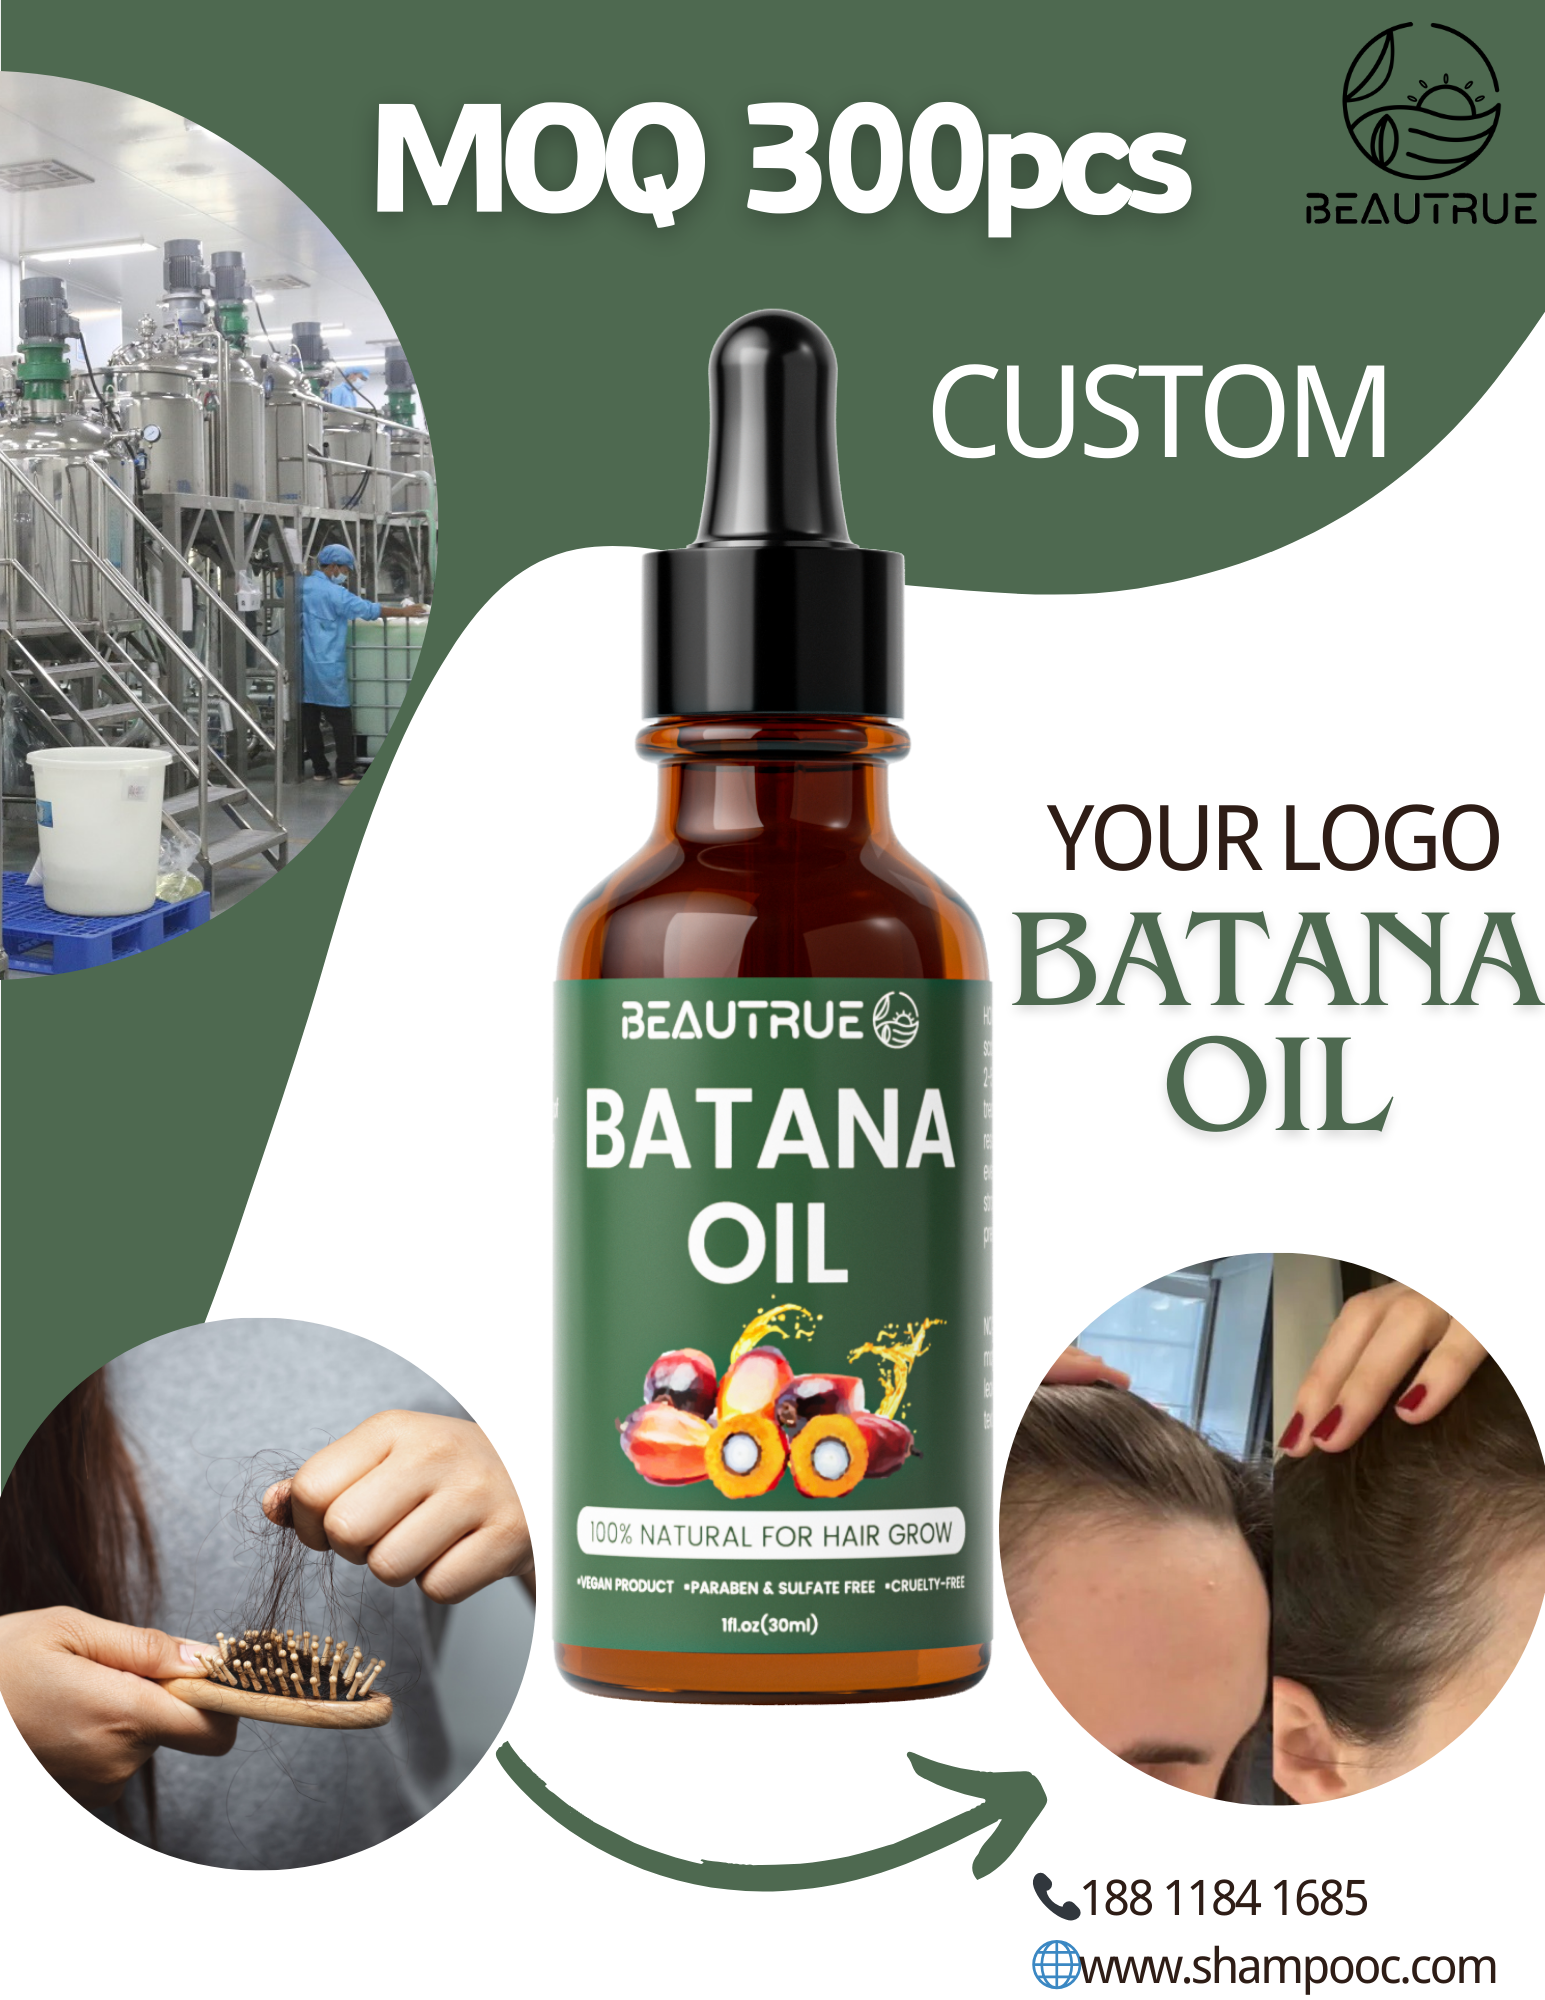 What's the Benefits of Batana Oil？